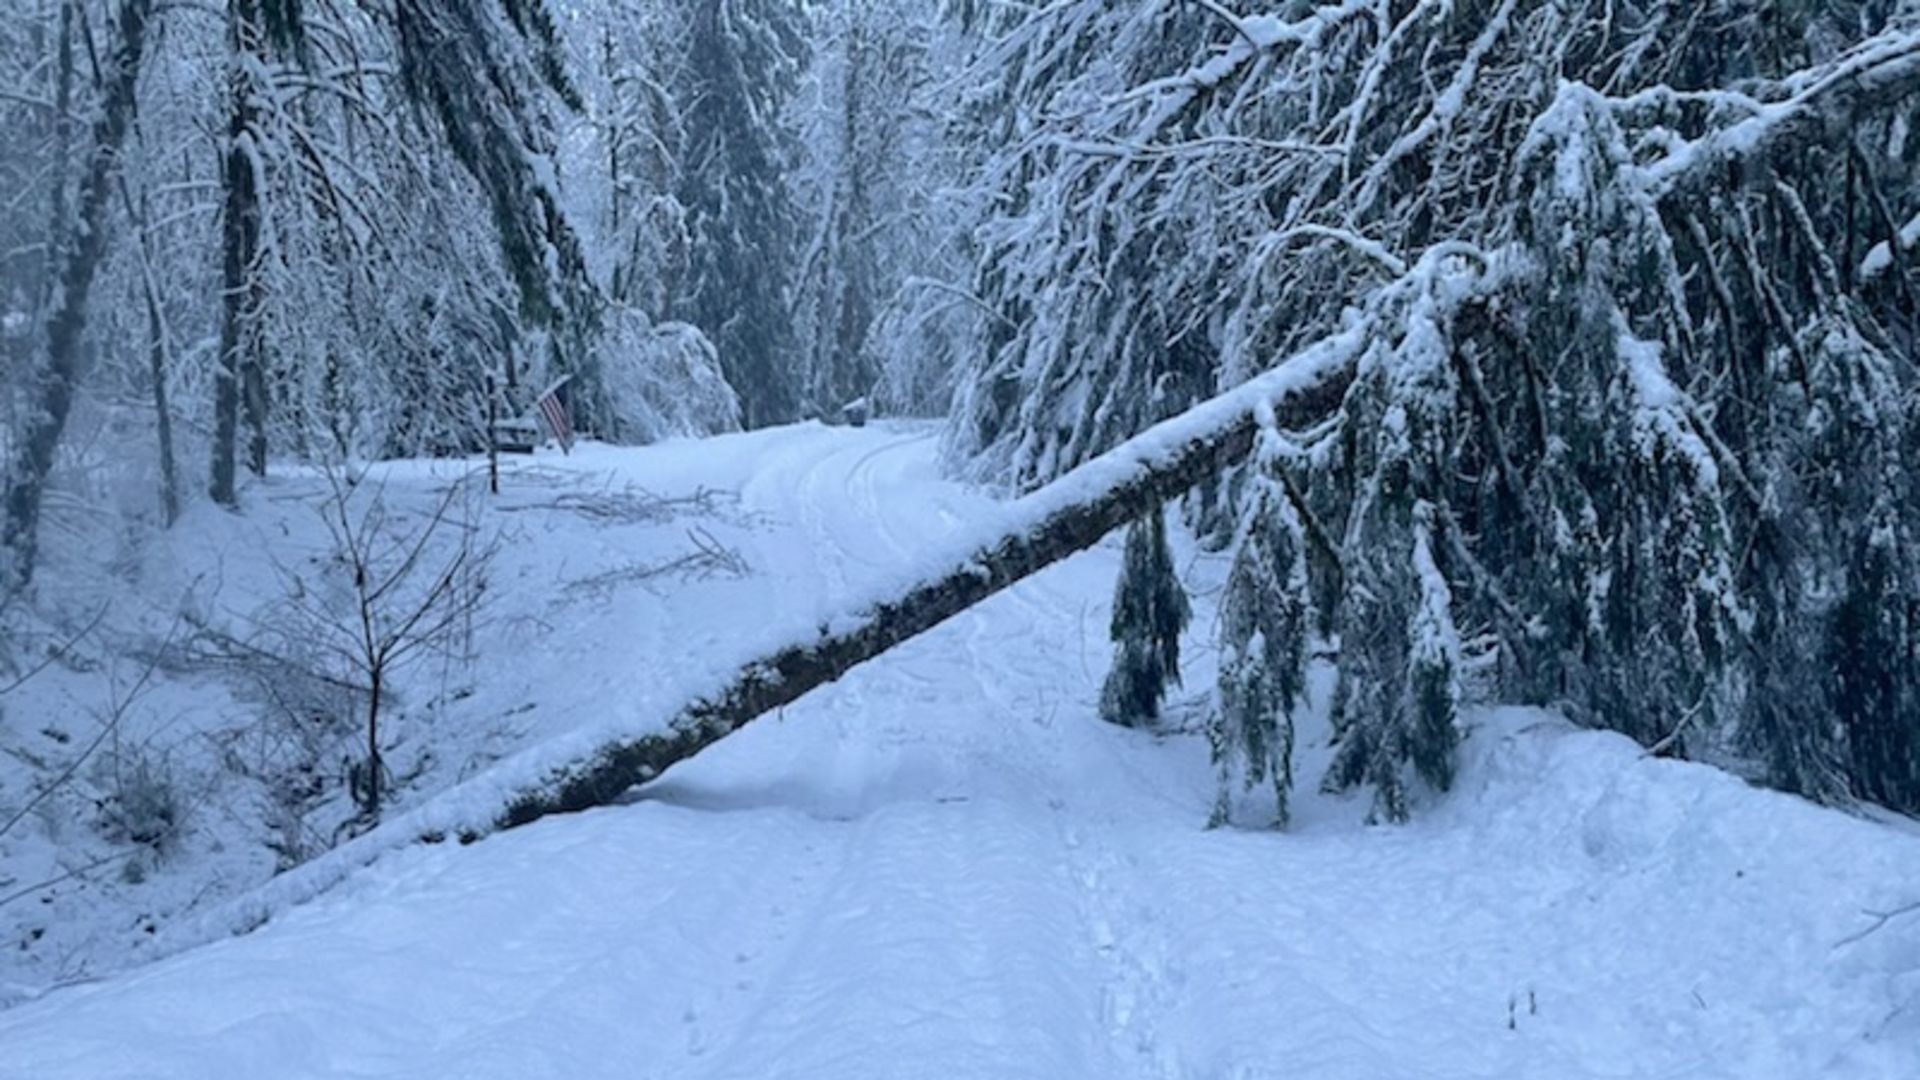 Mason County continues to deal with heavy snow, downed trees and power outages.